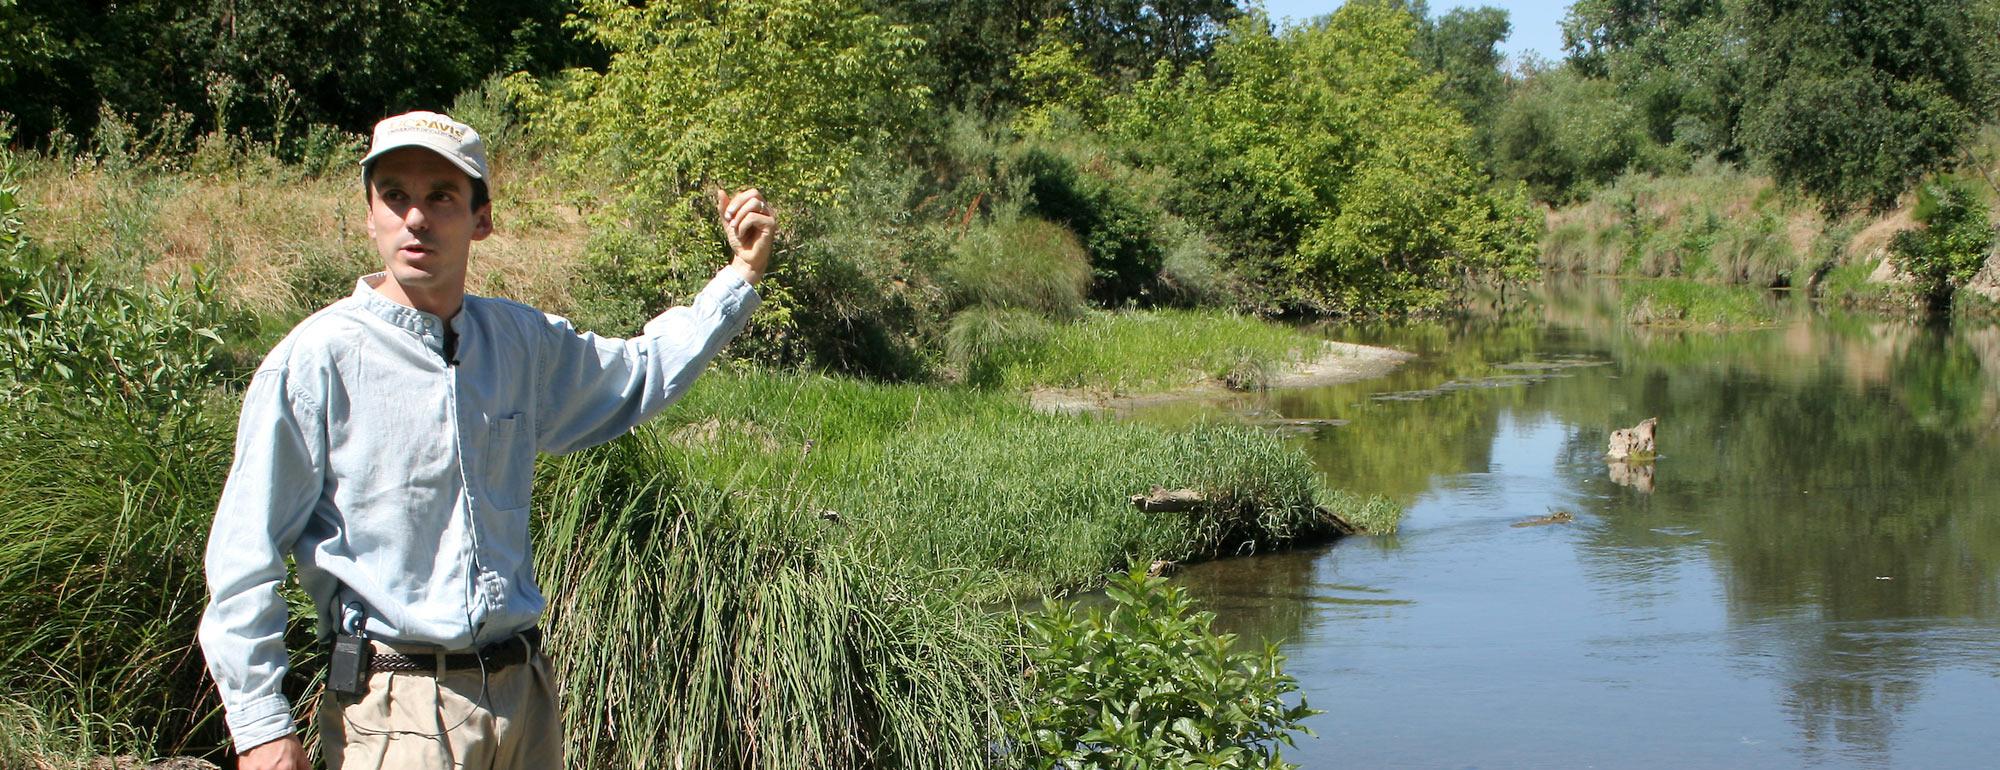 A UC Davis researcher points at a wetlands areas behind him